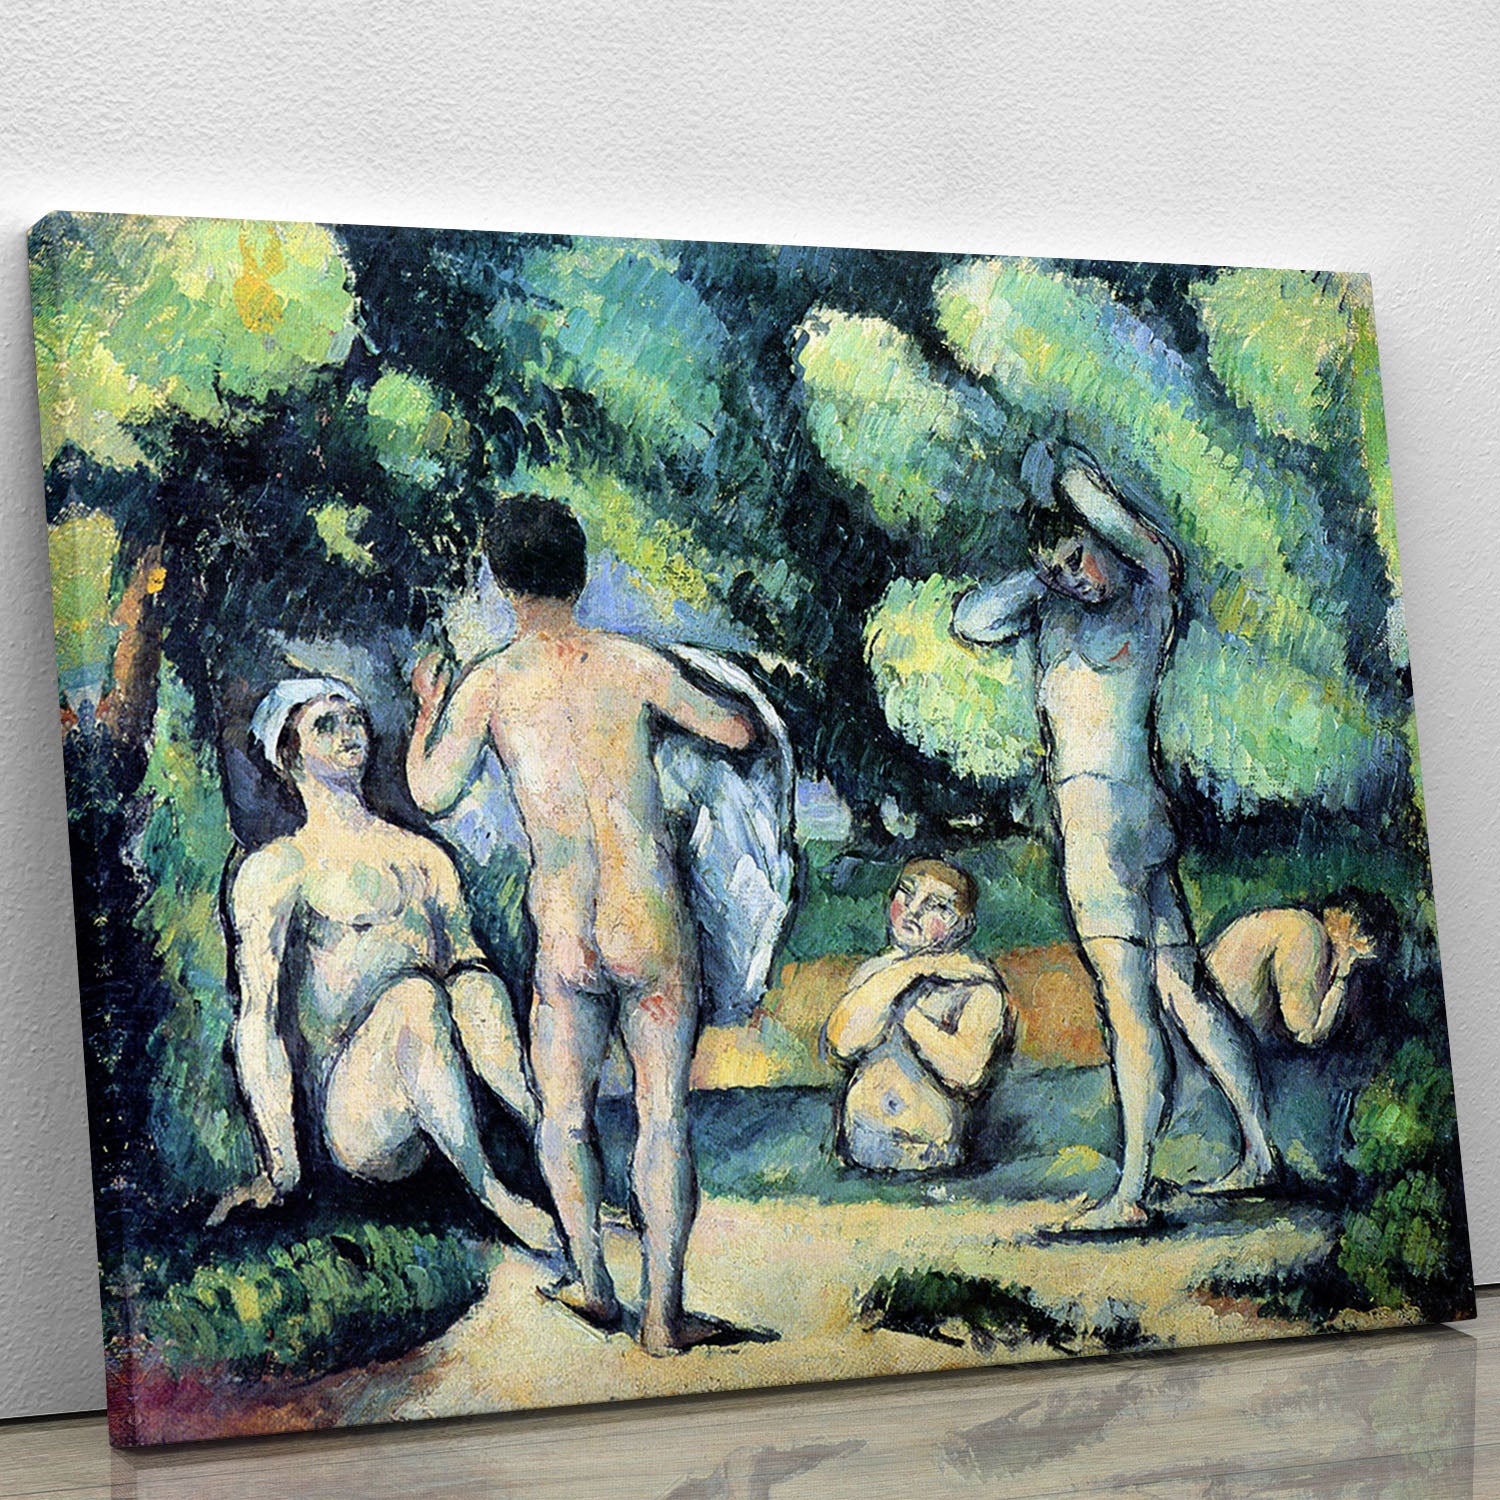 Bathers 3 by Cezanne Canvas Print or Poster - Canvas Art Rocks - 1